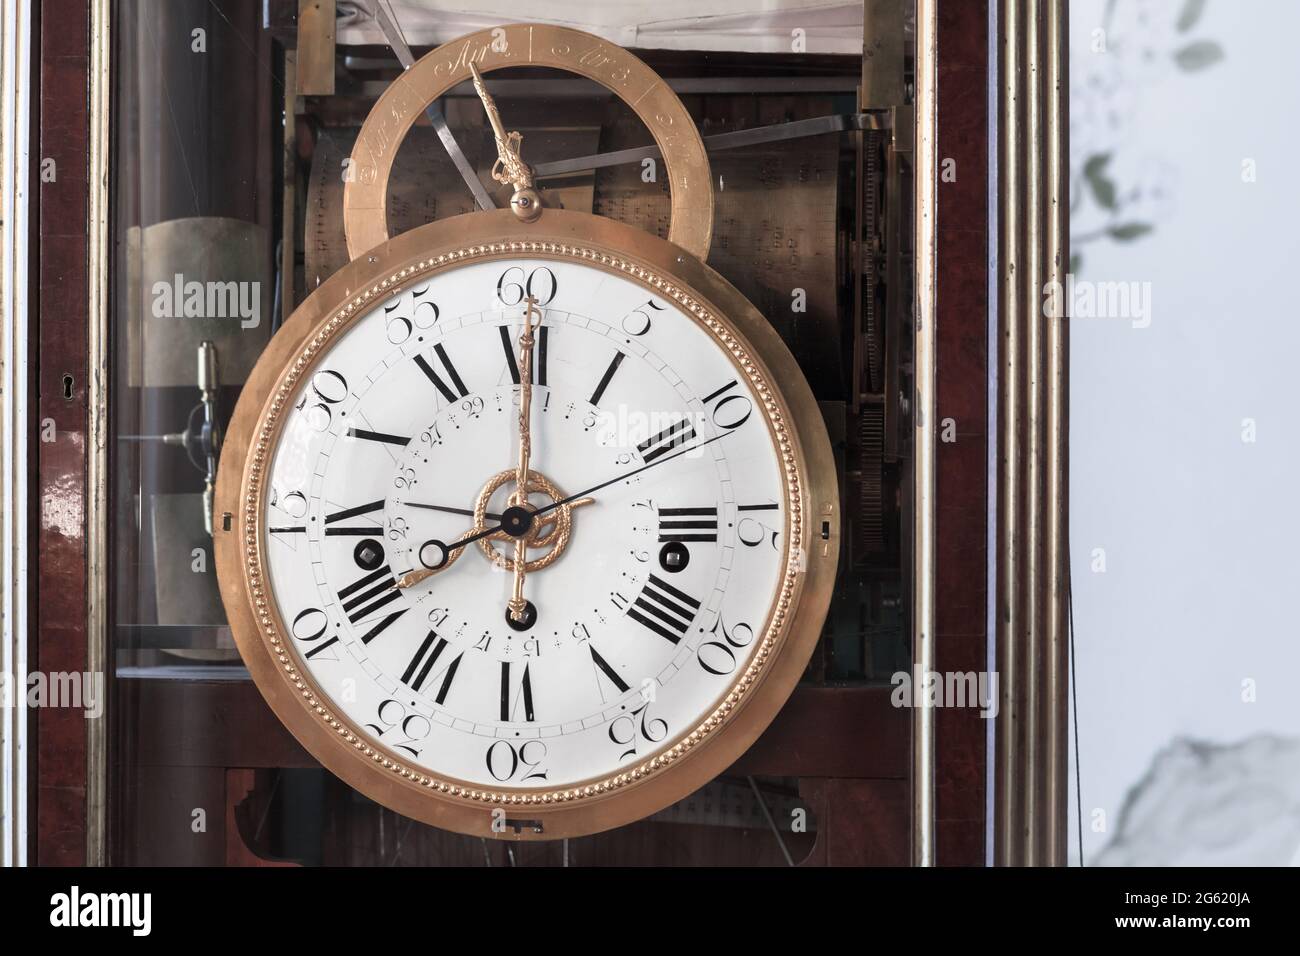 Vintage grandfather clock with white clock face. Close up photo Stock Photo